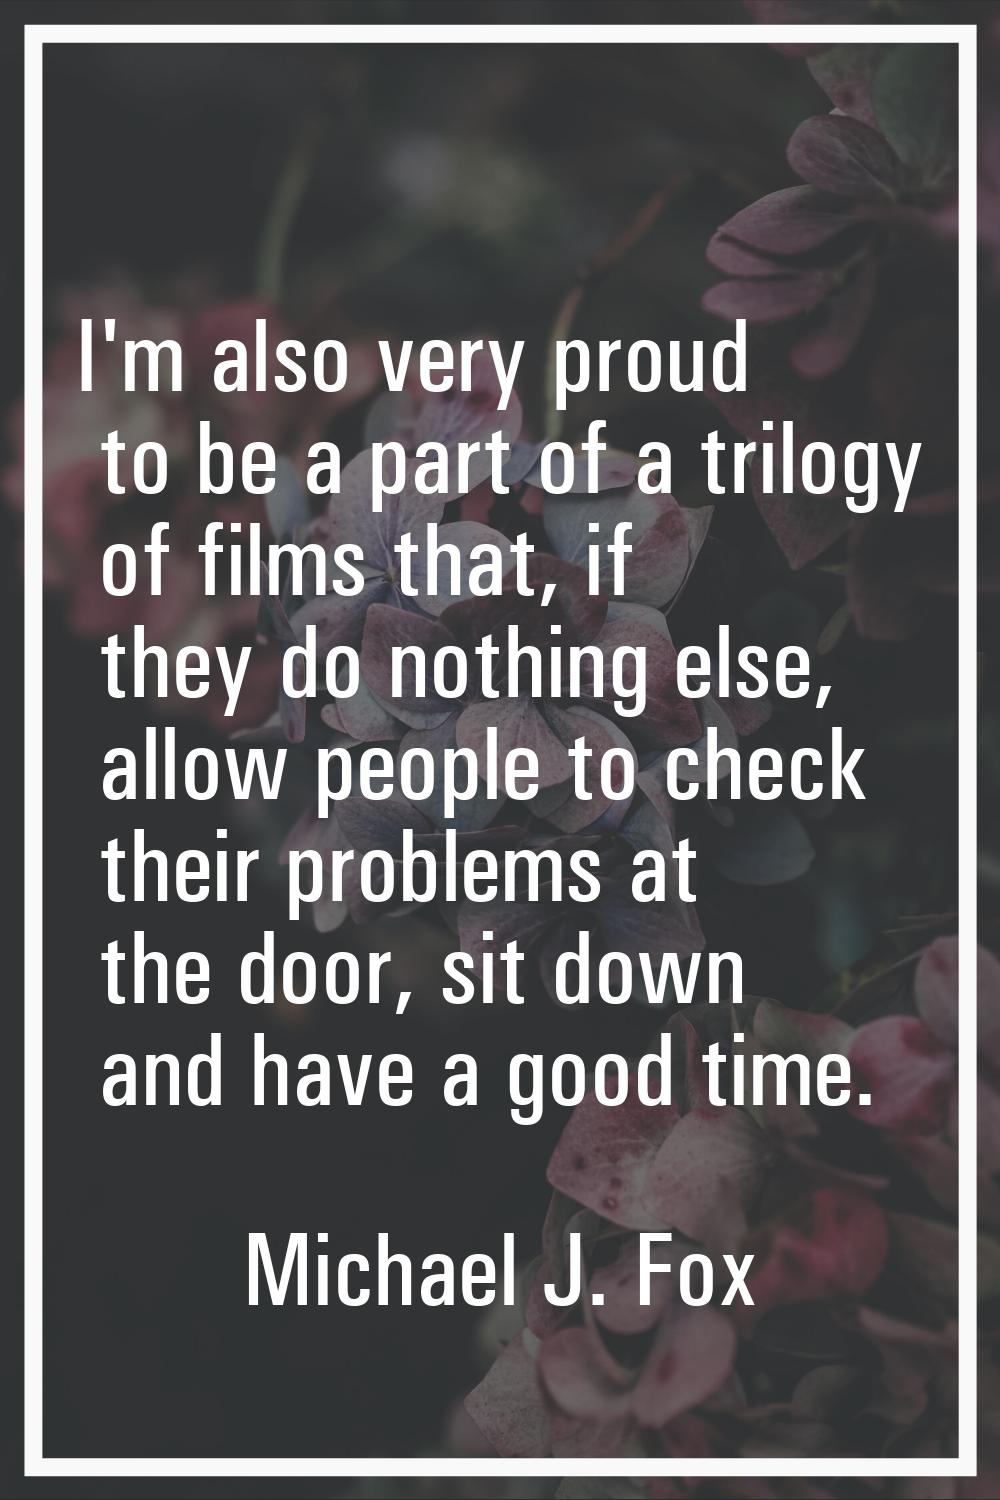 I'm also very proud to be a part of a trilogy of films that, if they do nothing else, allow people 